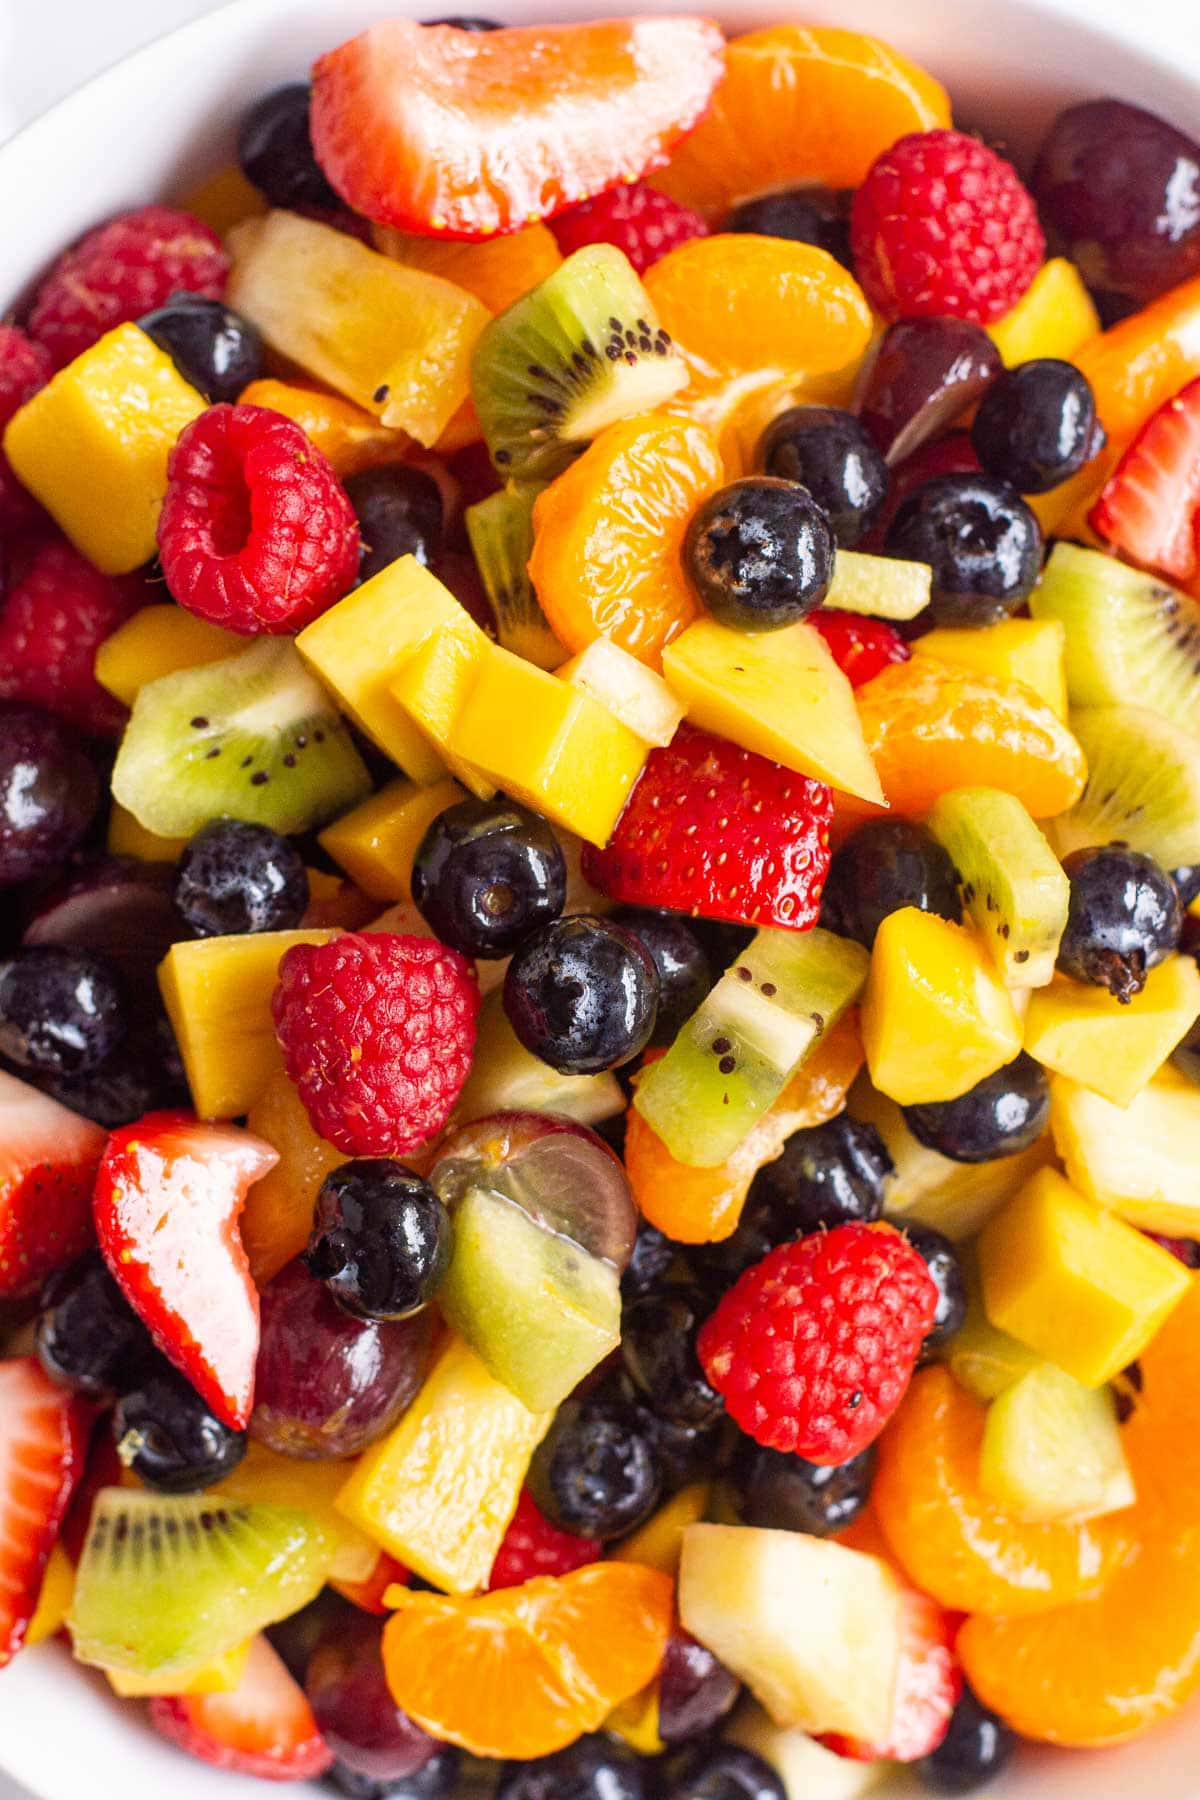 Close up of classic healthy fruit salad with berries, pineapple, mango, grapes and mandarins.